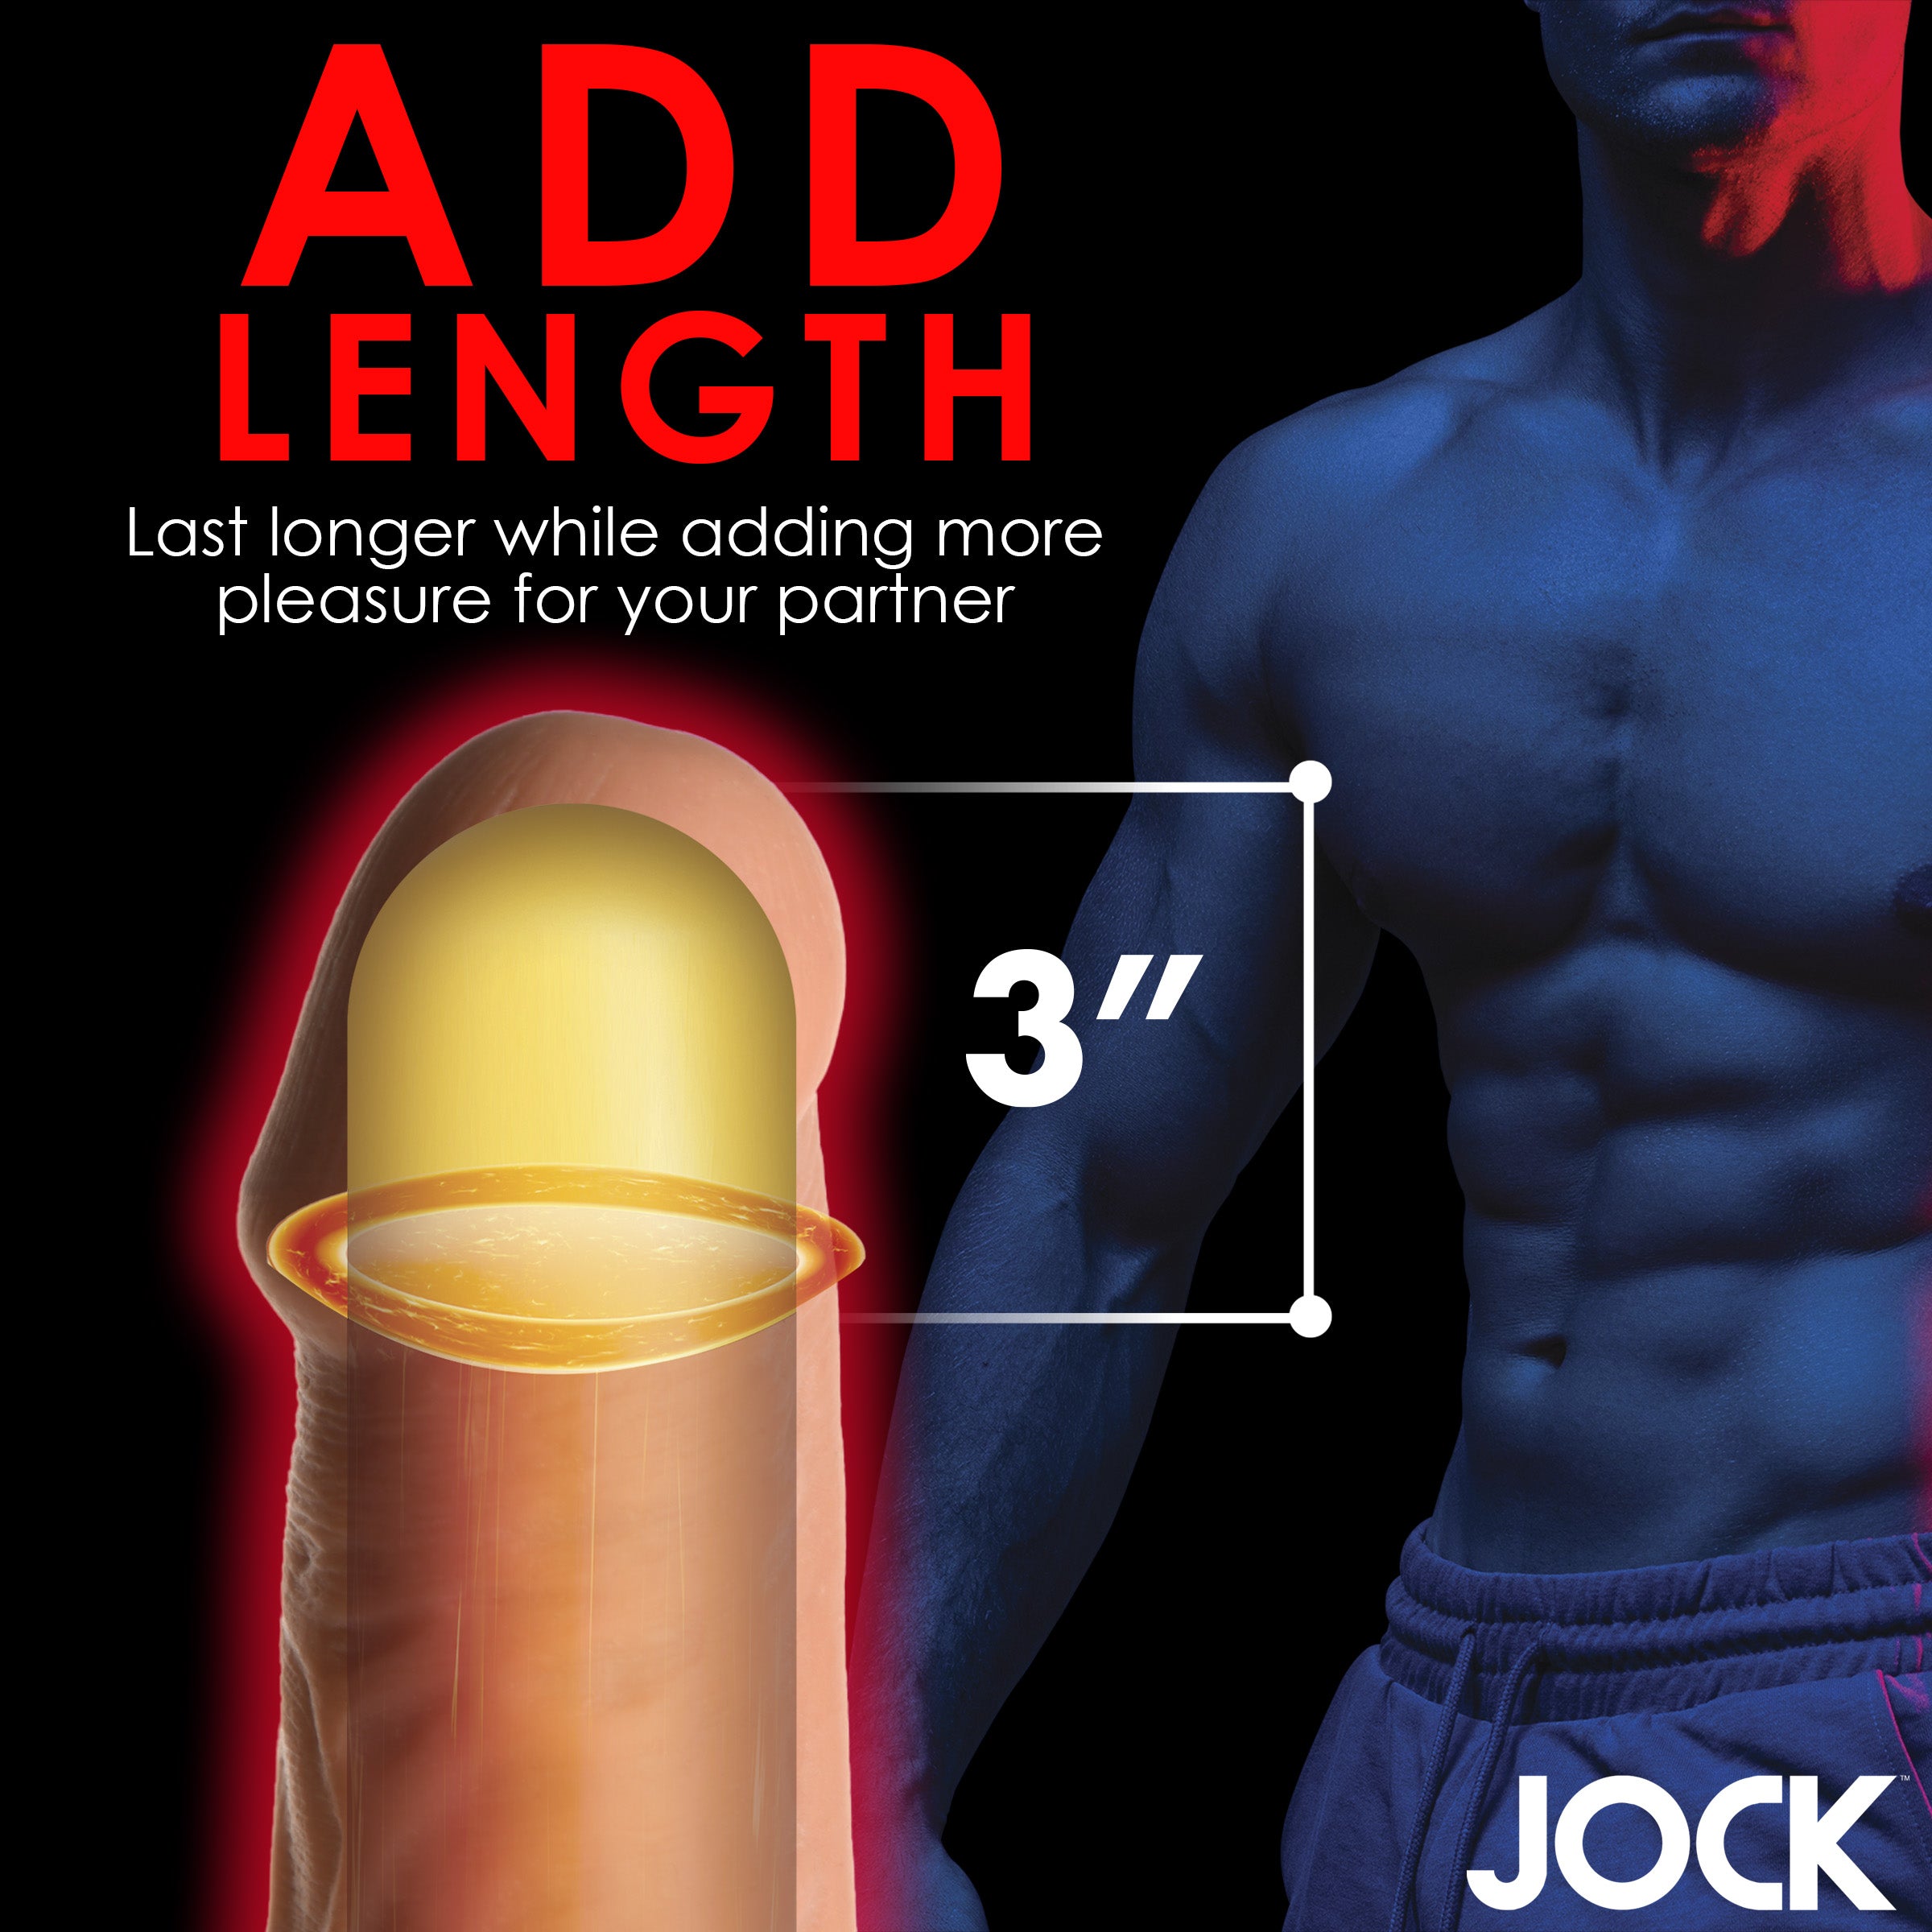 Extra Thick 2 Inch Penis Extension